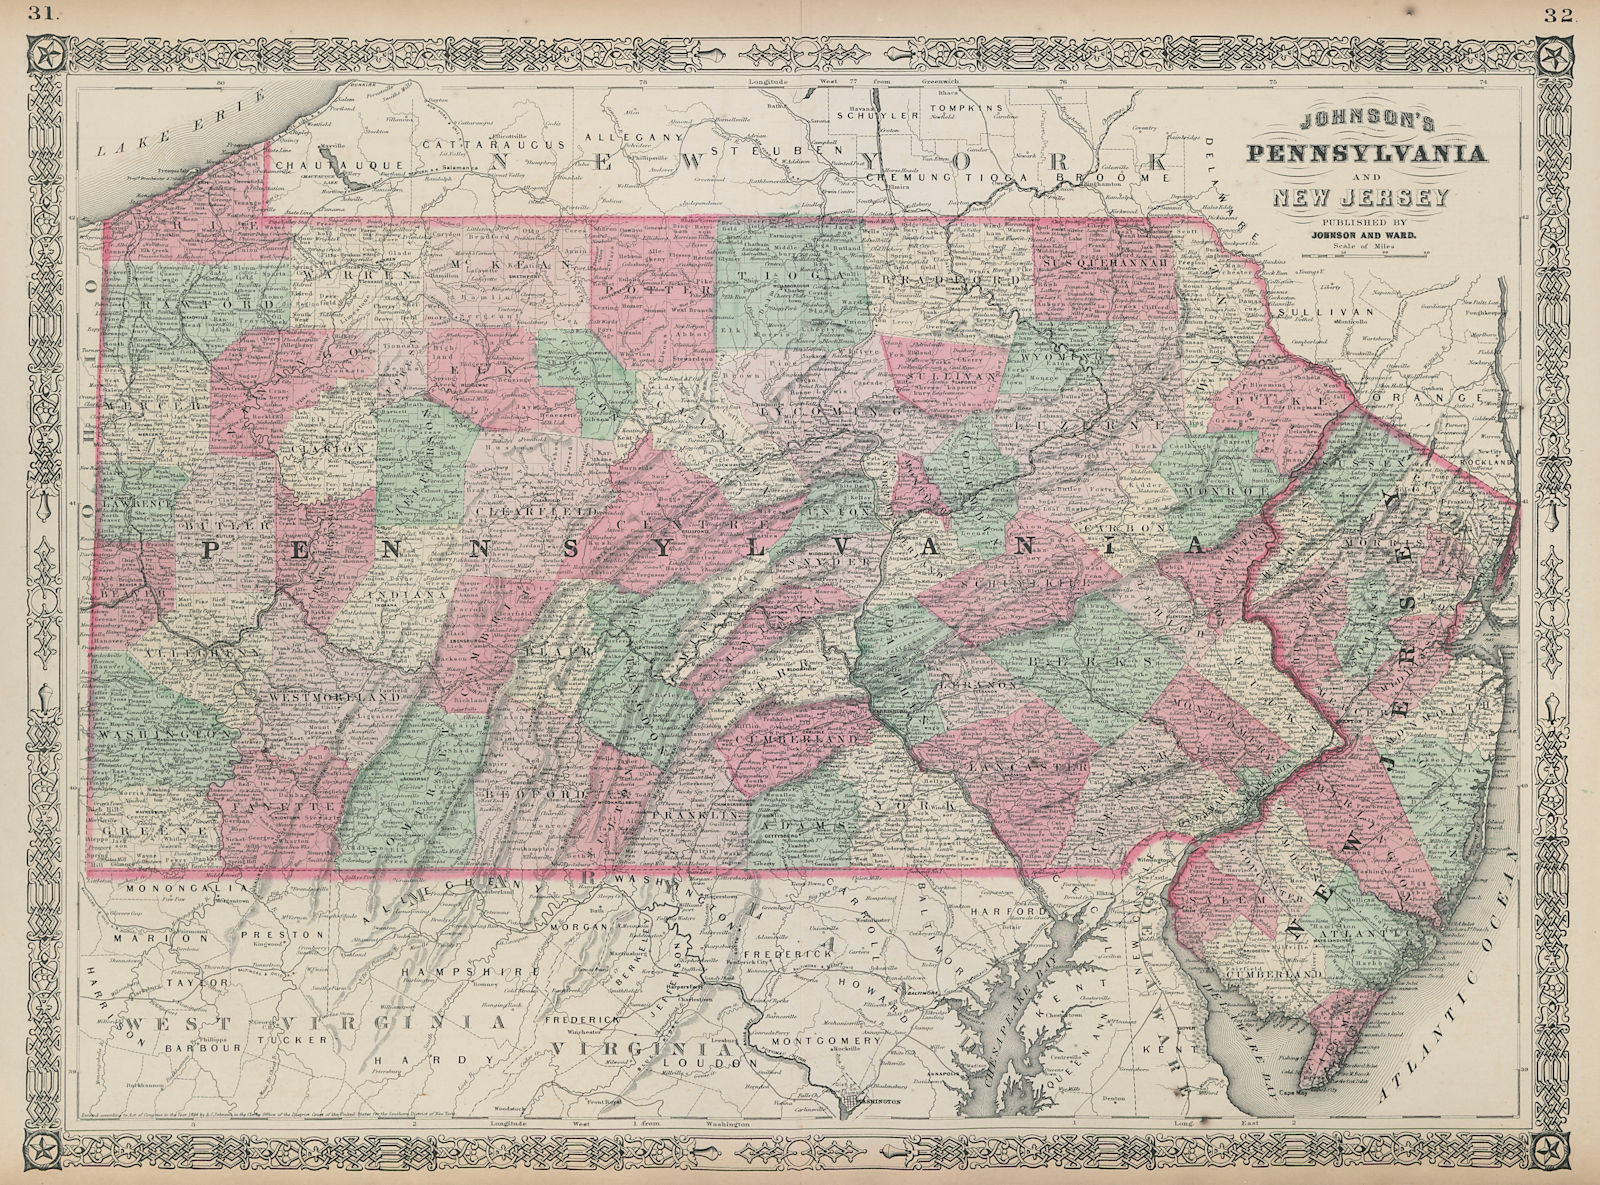 Associate Product Johnson's Pennsylvania and New Jersey. US state map showing counties 1865